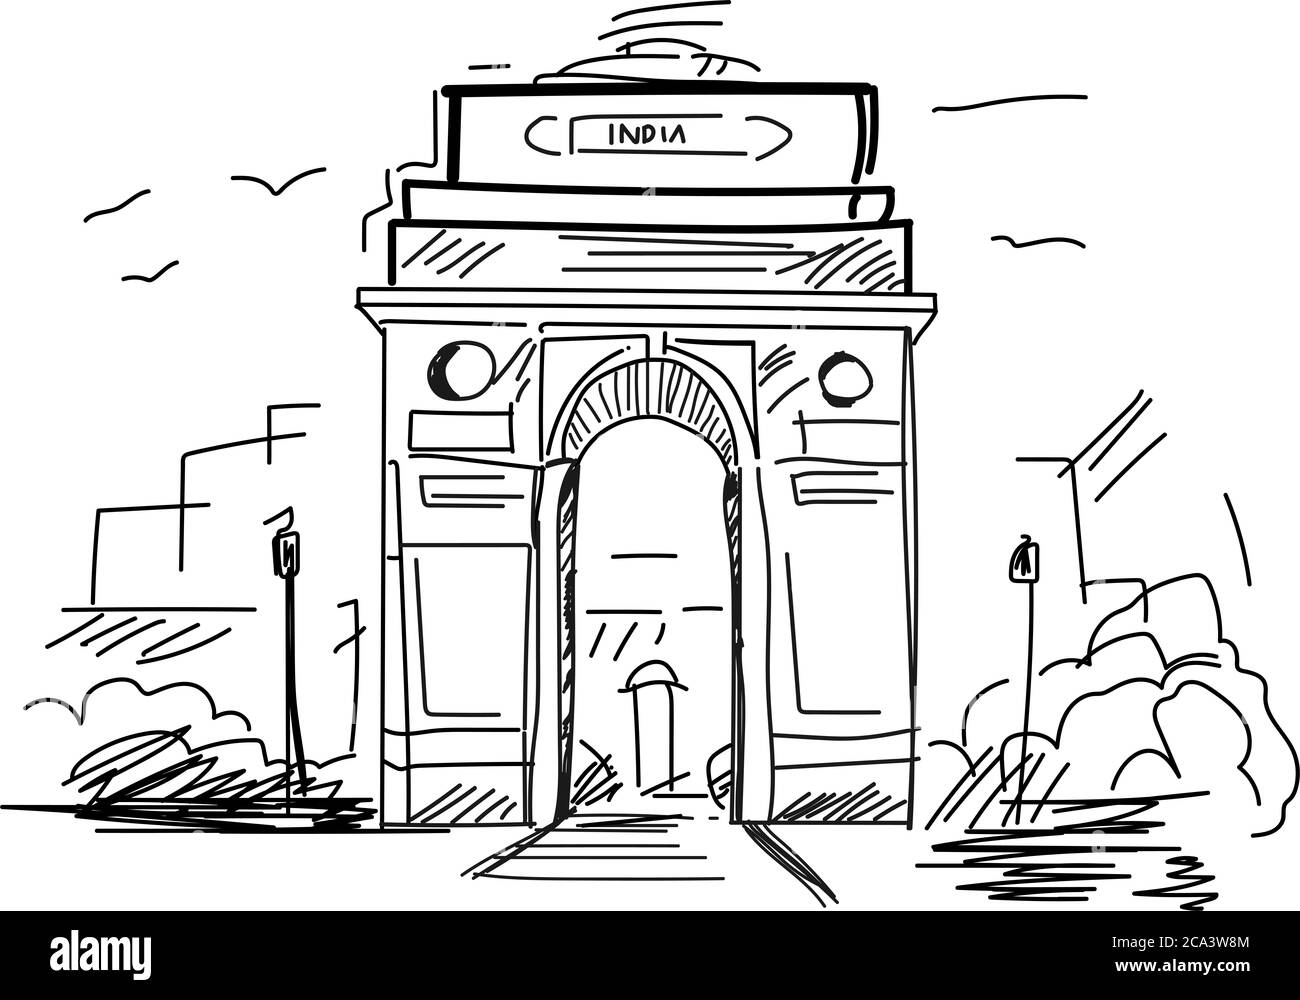 Great Pencil Sketch Of India Gate - Desi Painters